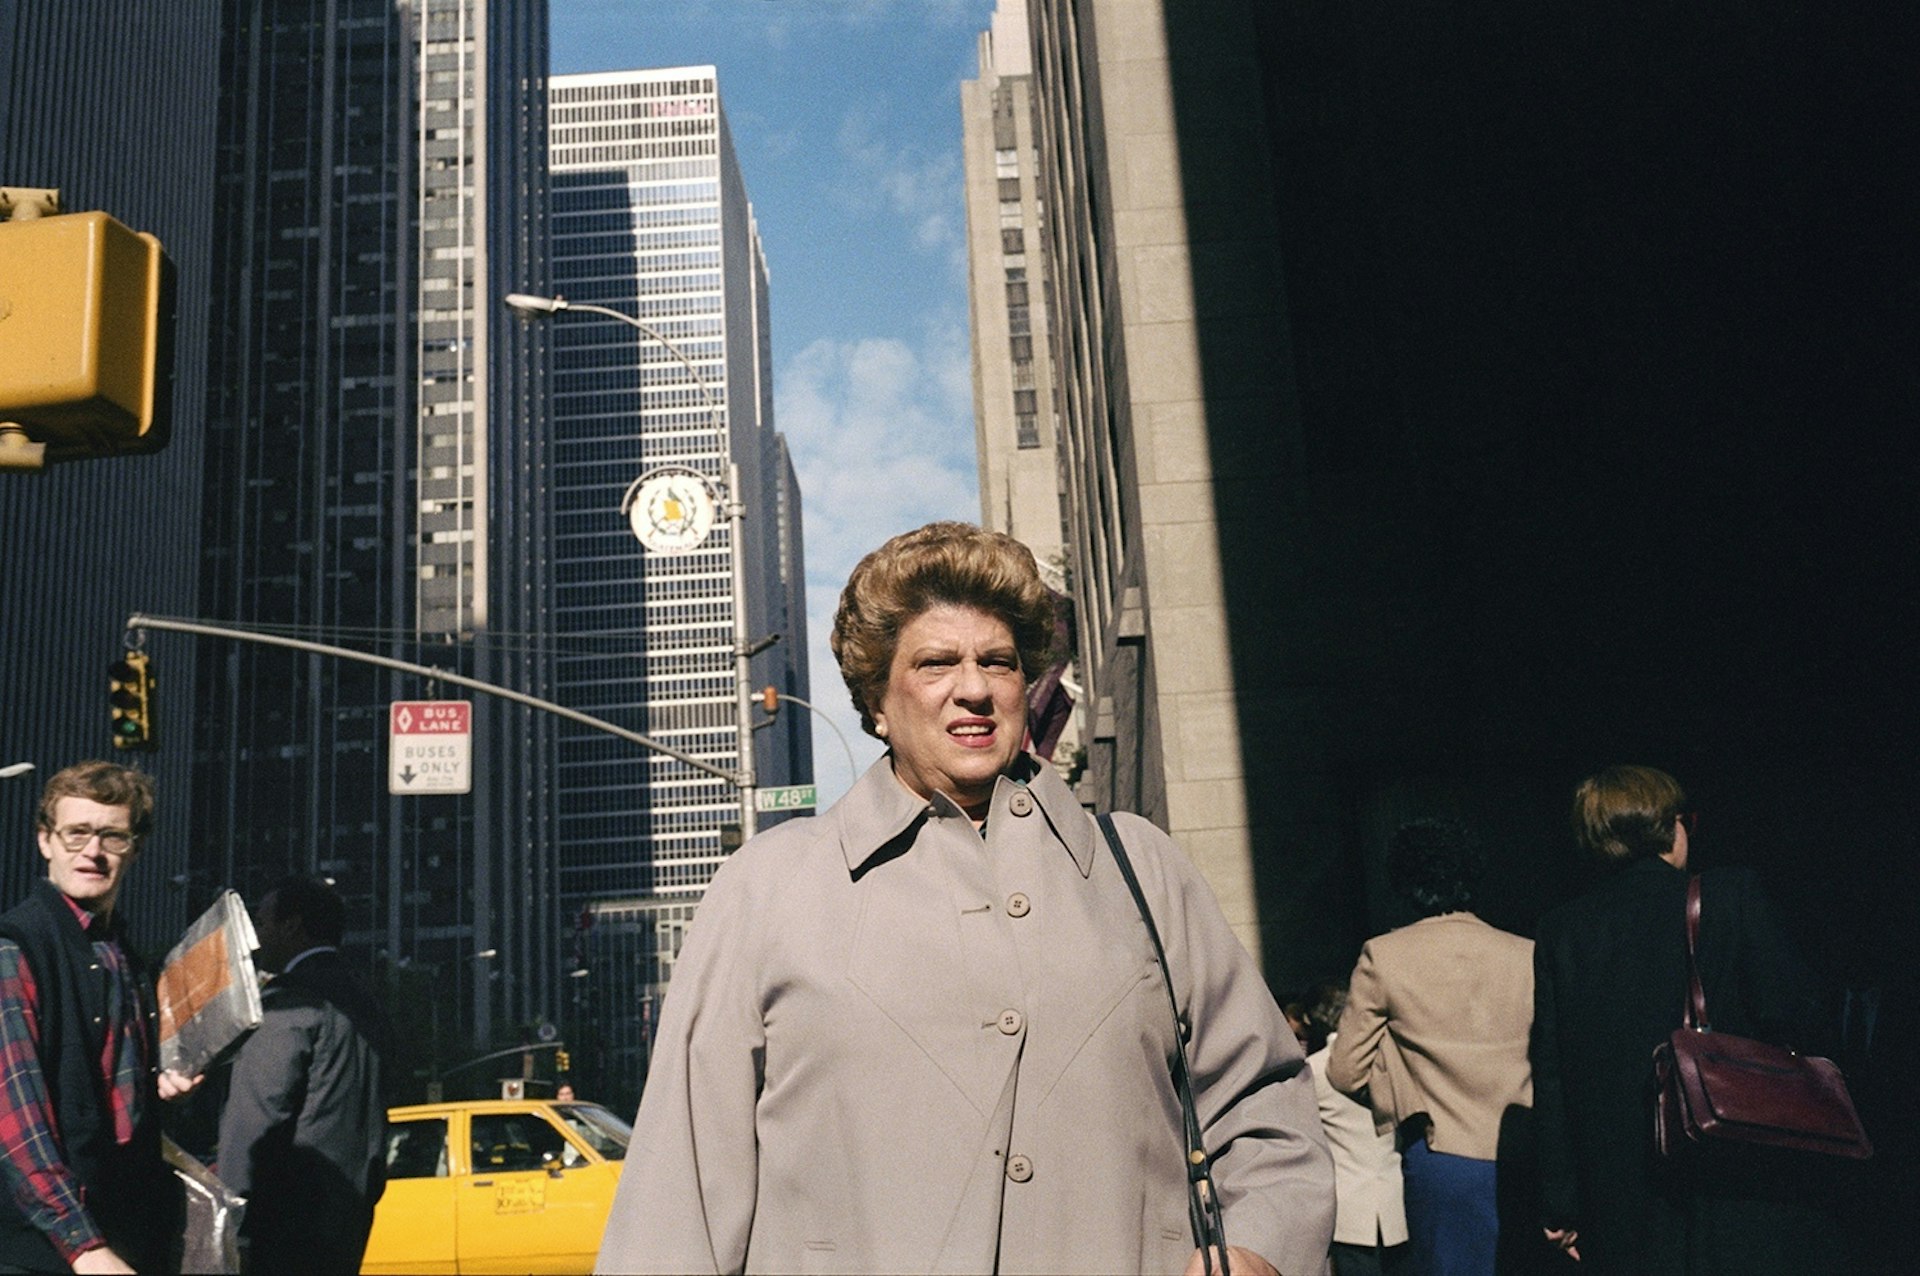 Sunny street shots of New York in the ‘80s